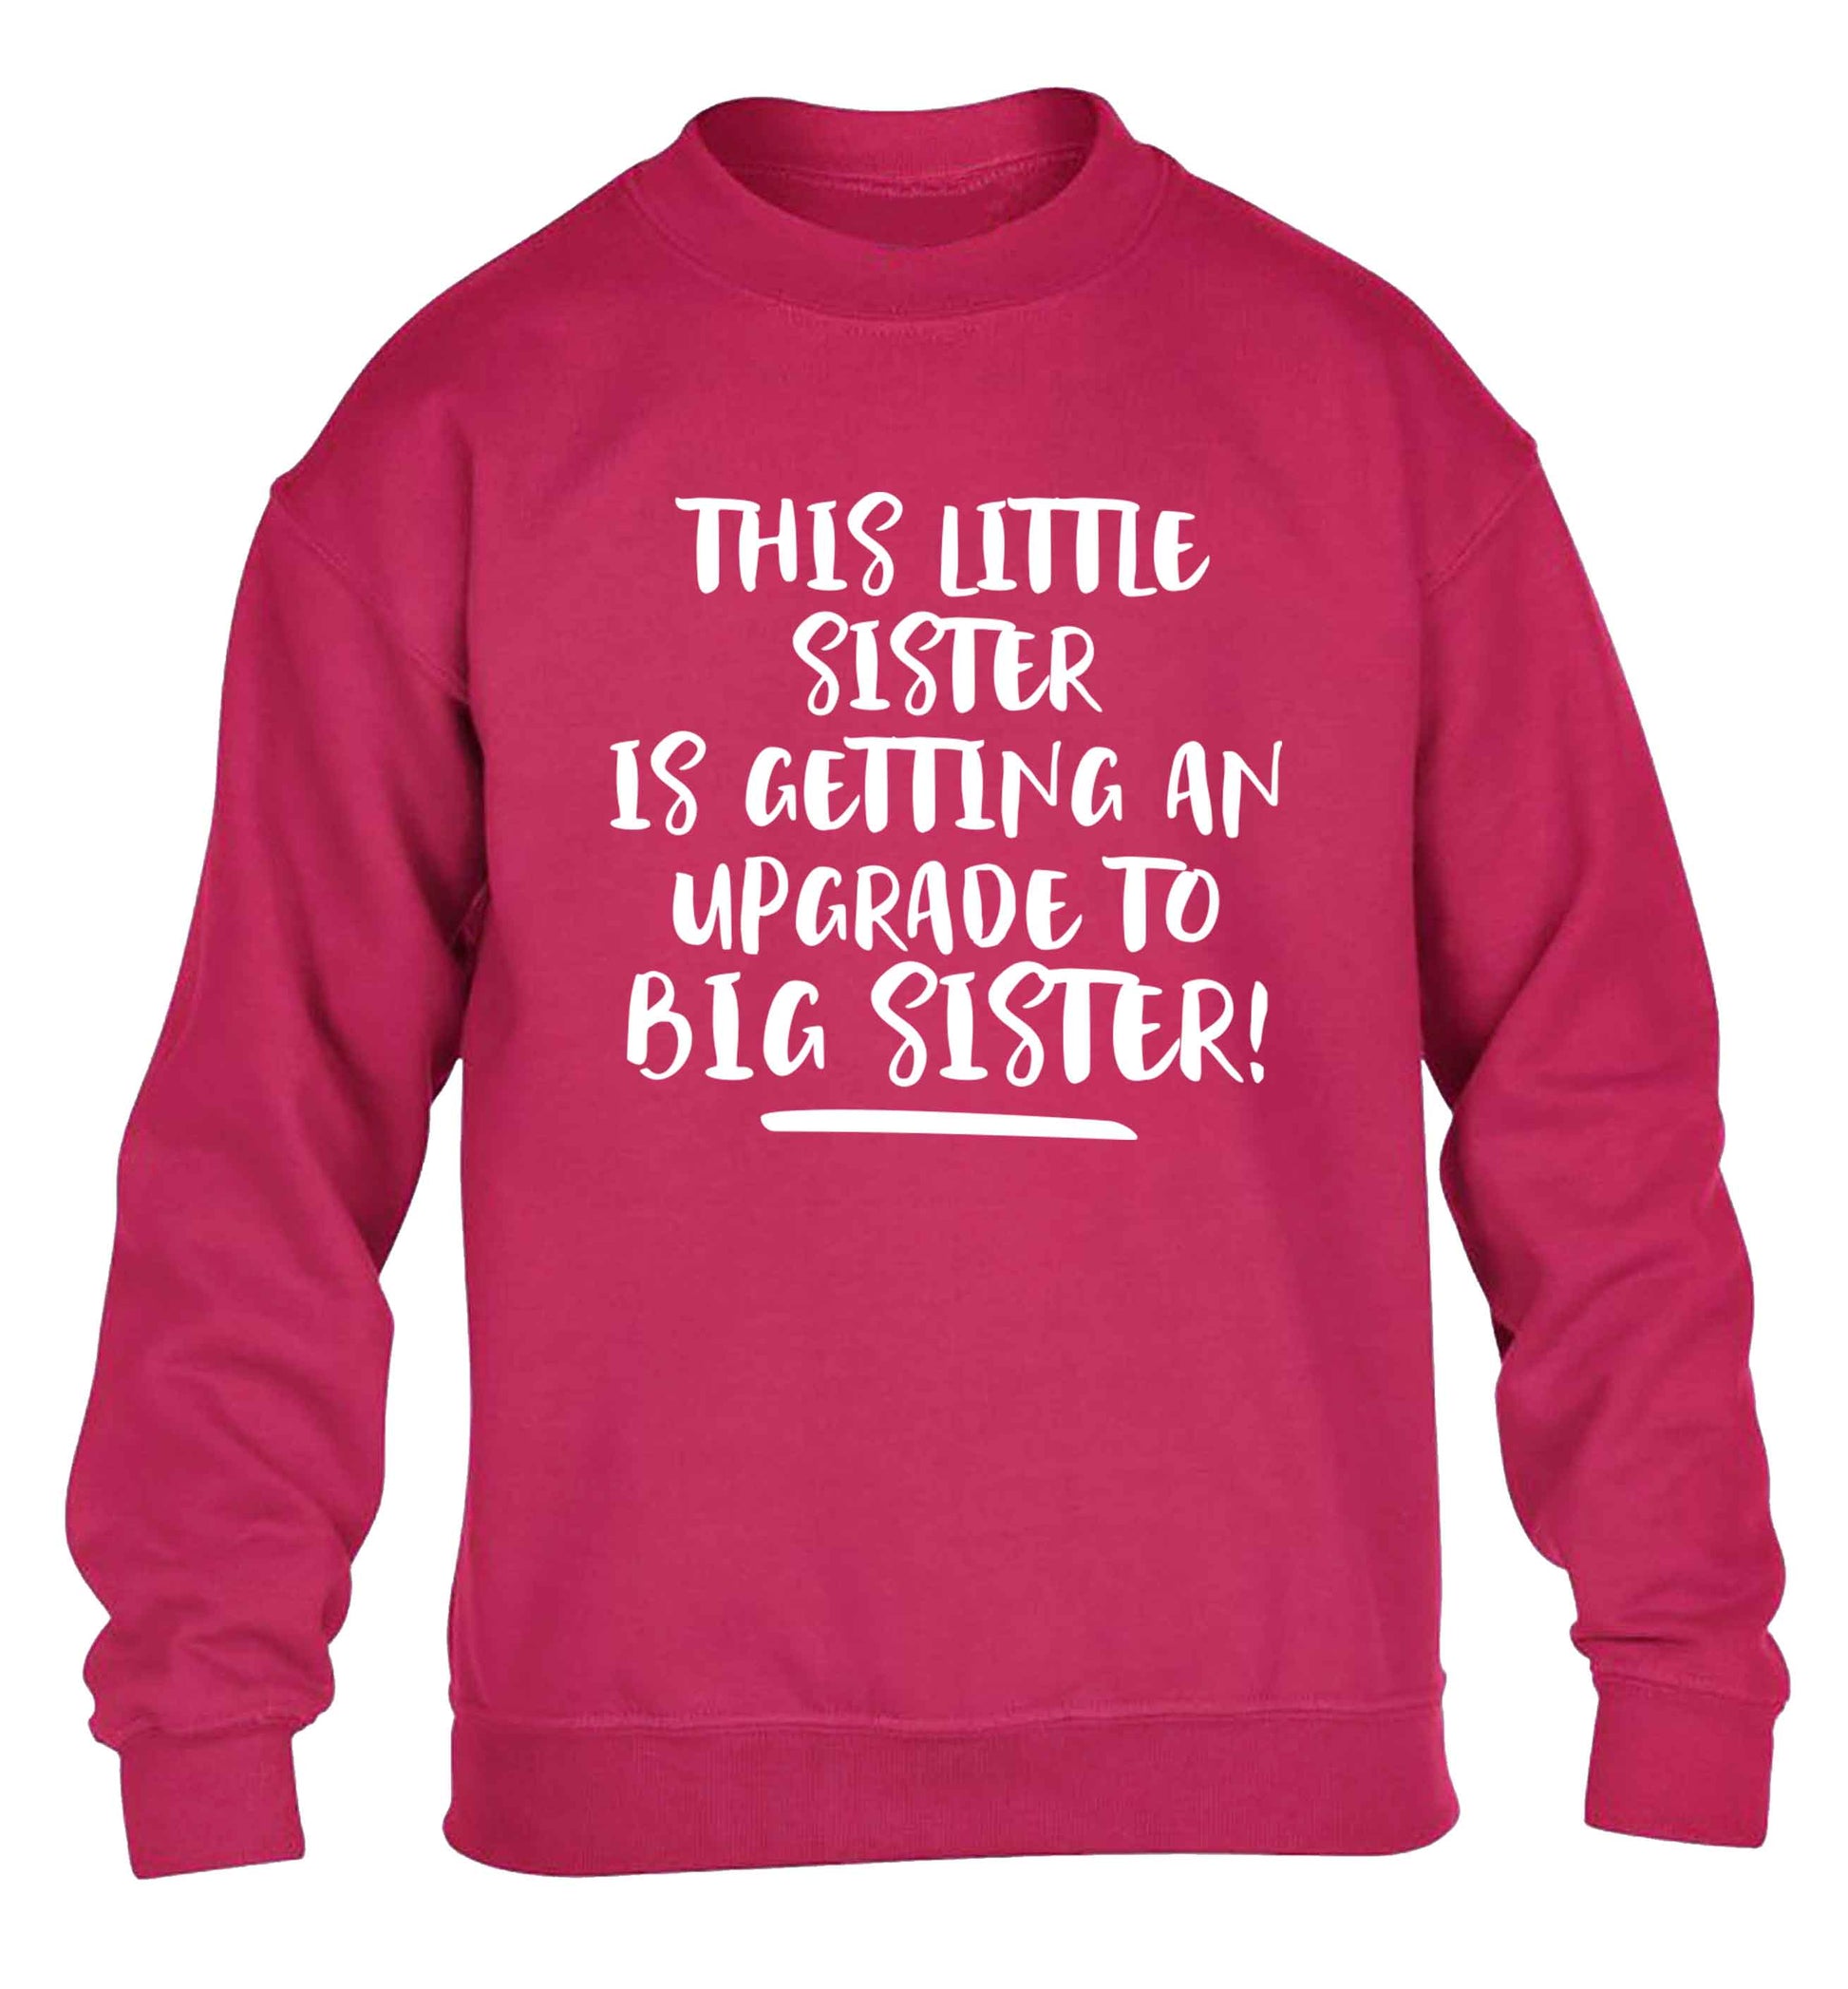 This little sister is getting an upgrade to big sister! children's pink sweater 12-13 Years